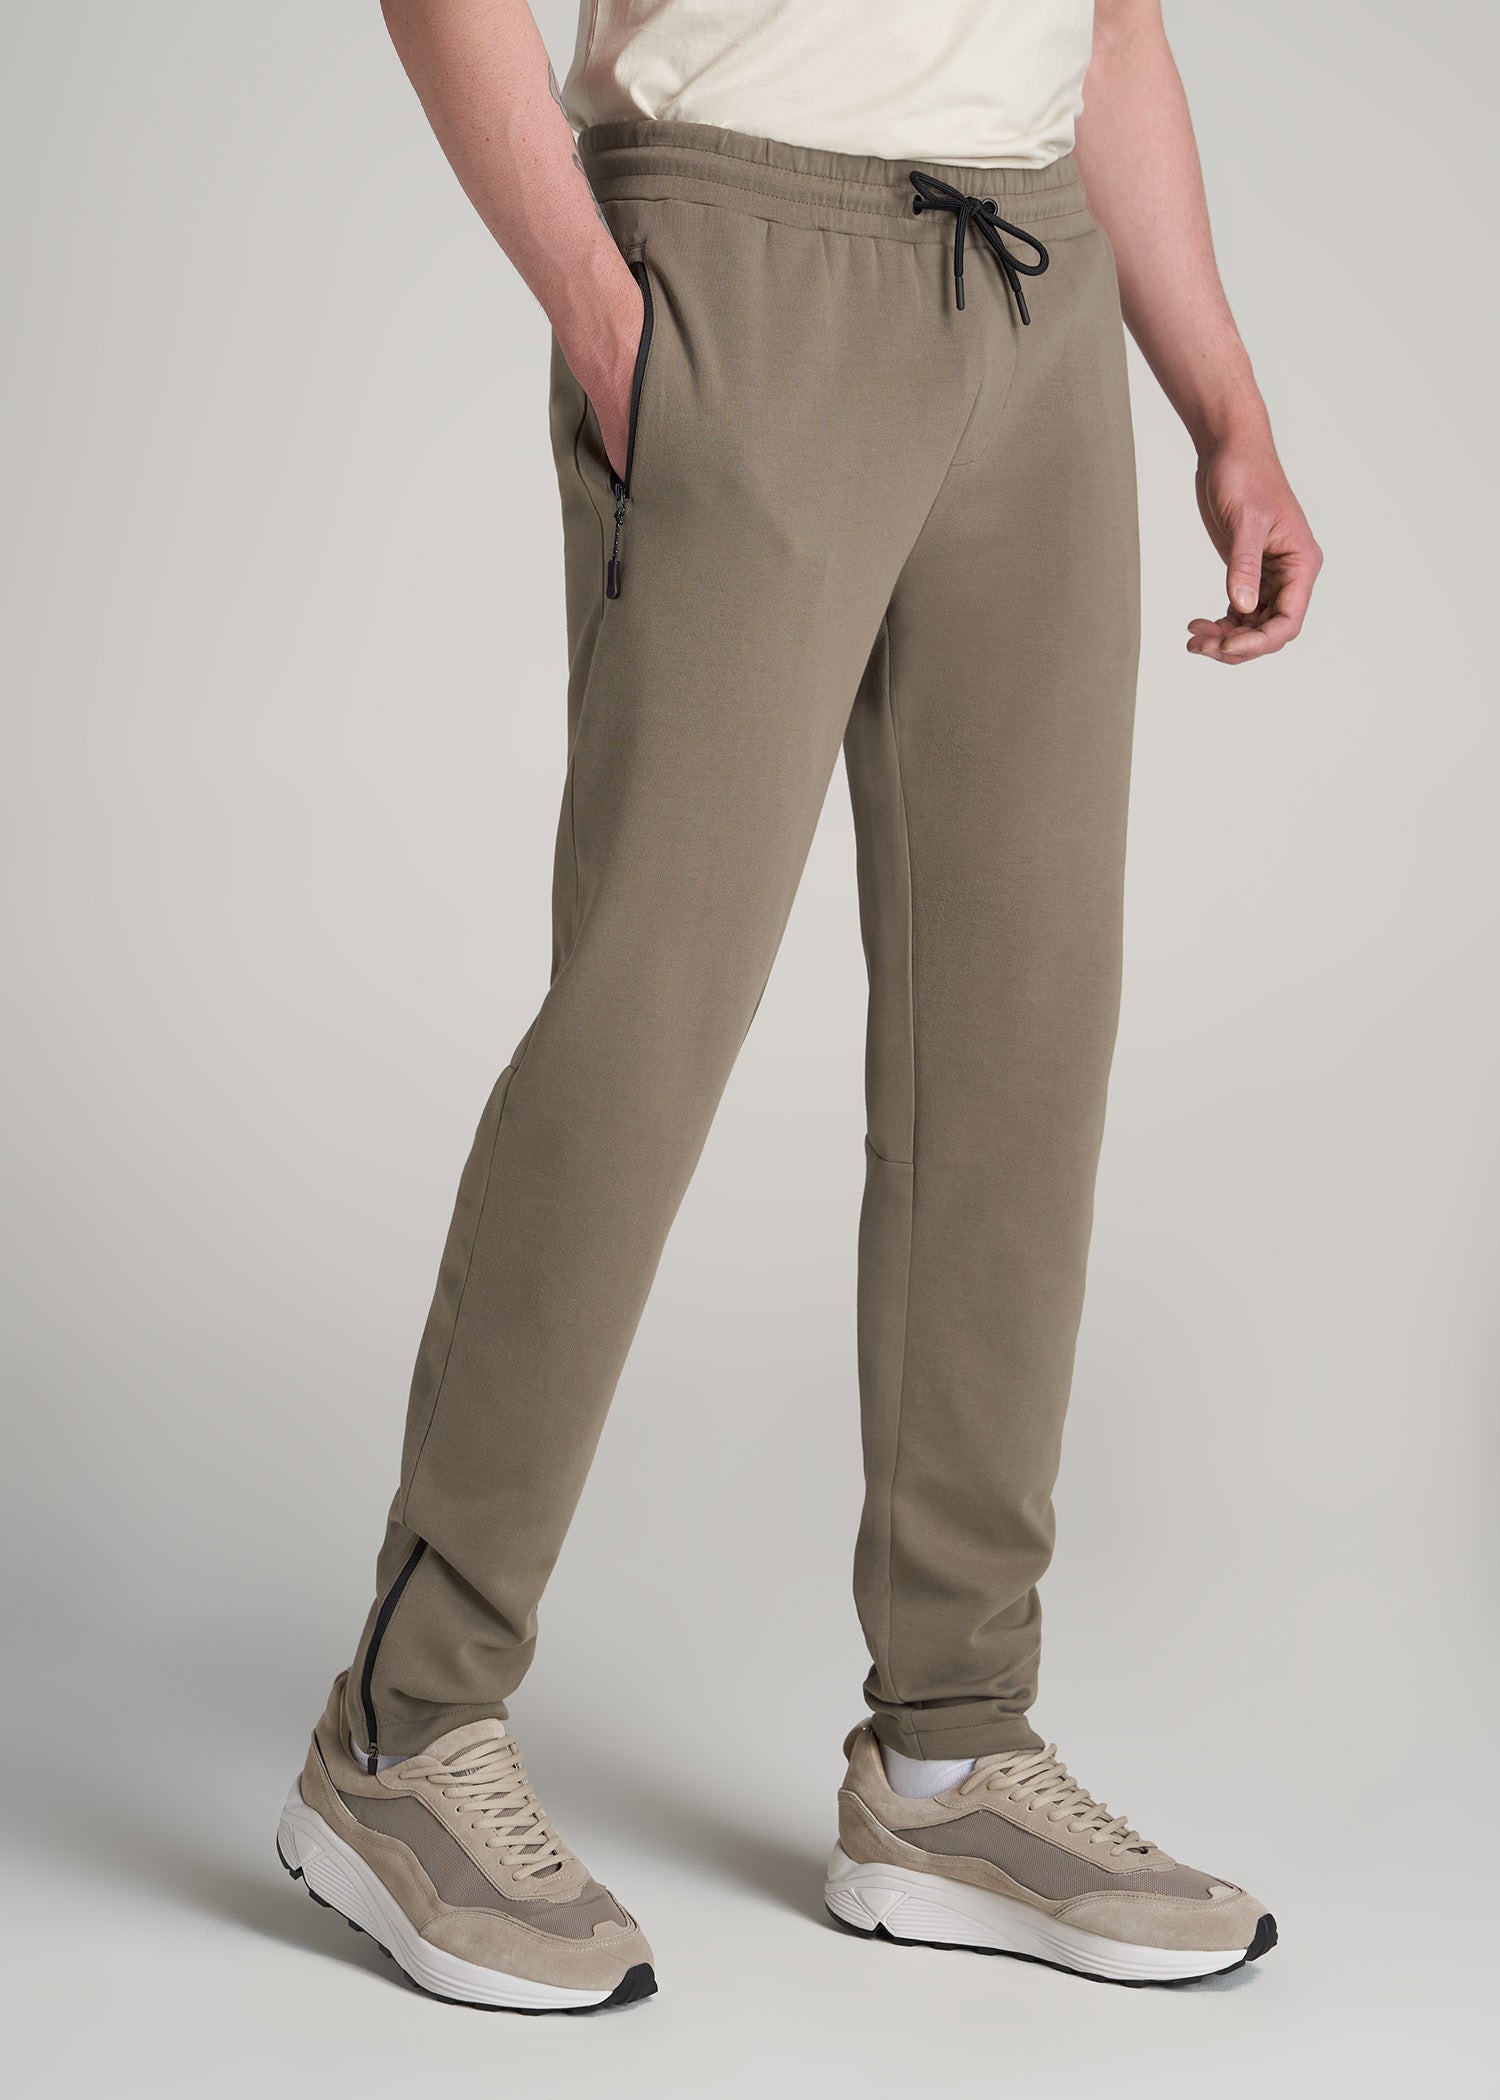 Men's Tall Knit Zip Joggers Deep Taupe | American